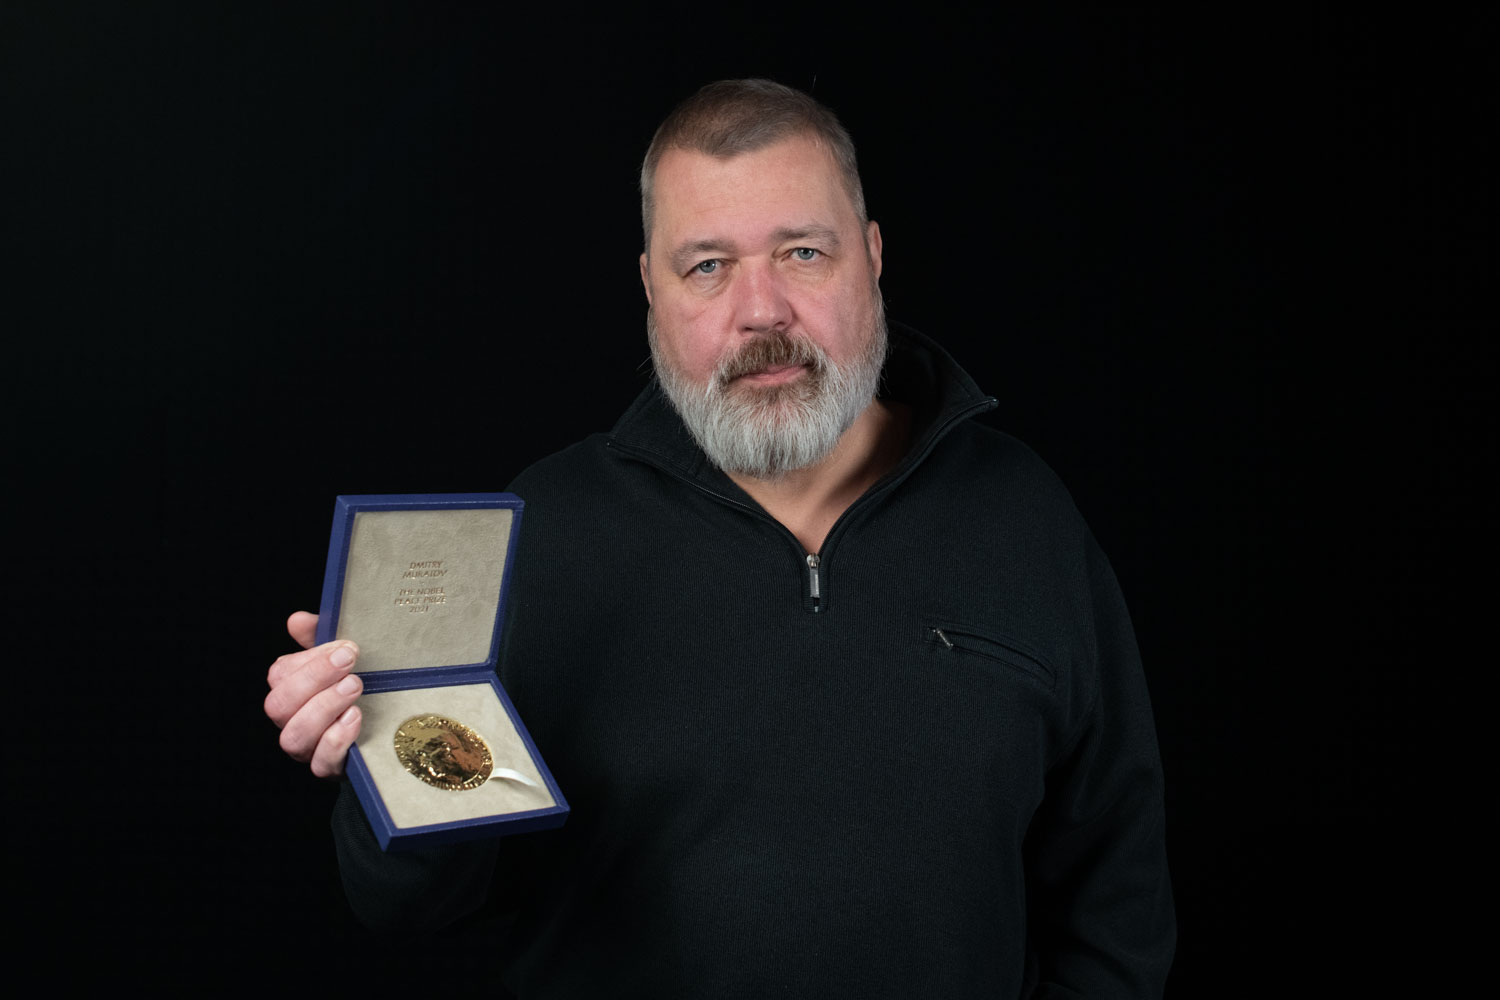 Russian journalist and editor-in-chief of the Novaya Gazeta newspaper Dmitry Muratov poses with his 2021 Nobel Peace Prize before it sold for $103.5 million. All proceeds have been given to UNICEF for its efforts in Ukraine and those affected by the war. Image courtesy of Heritage Auctions